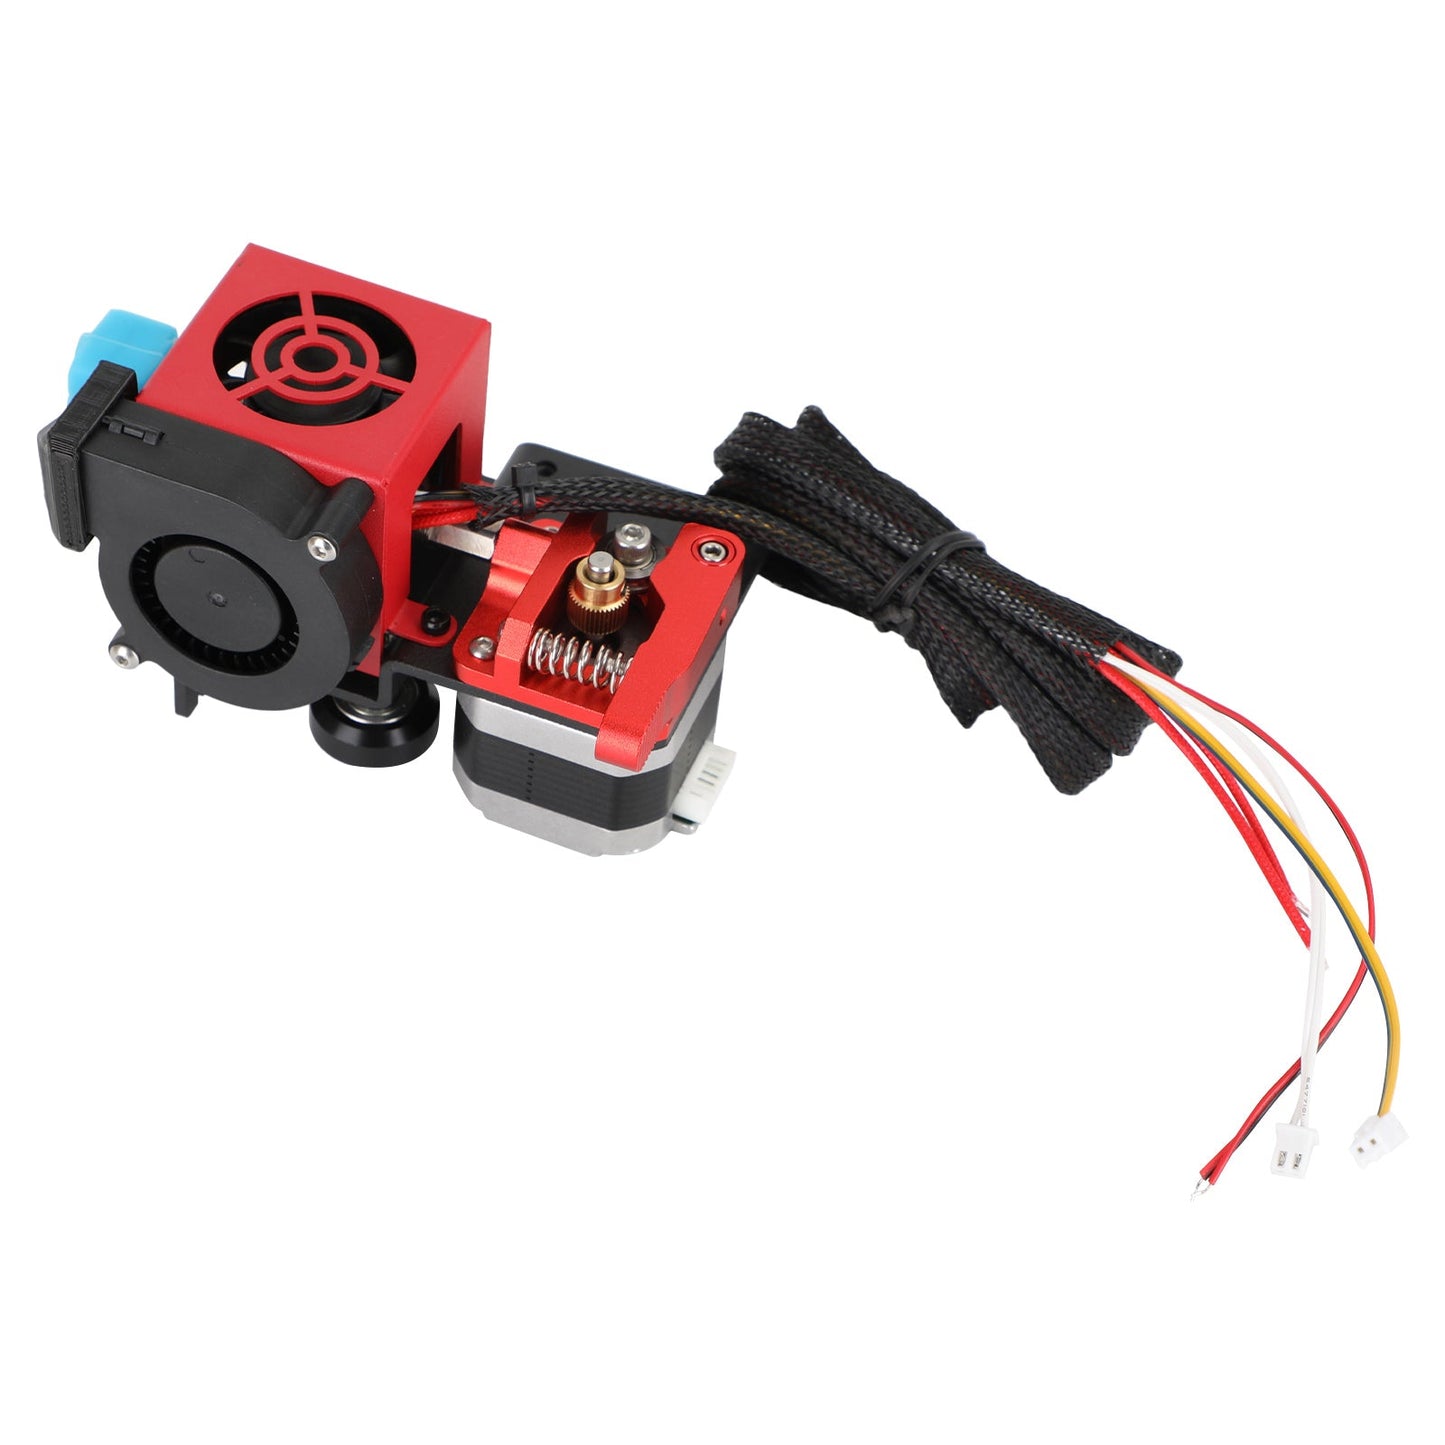 12V 3D Printer MK8 Direct Drive Hotend Pulley Turbo Fan Extruder for CR-10 S4 S5